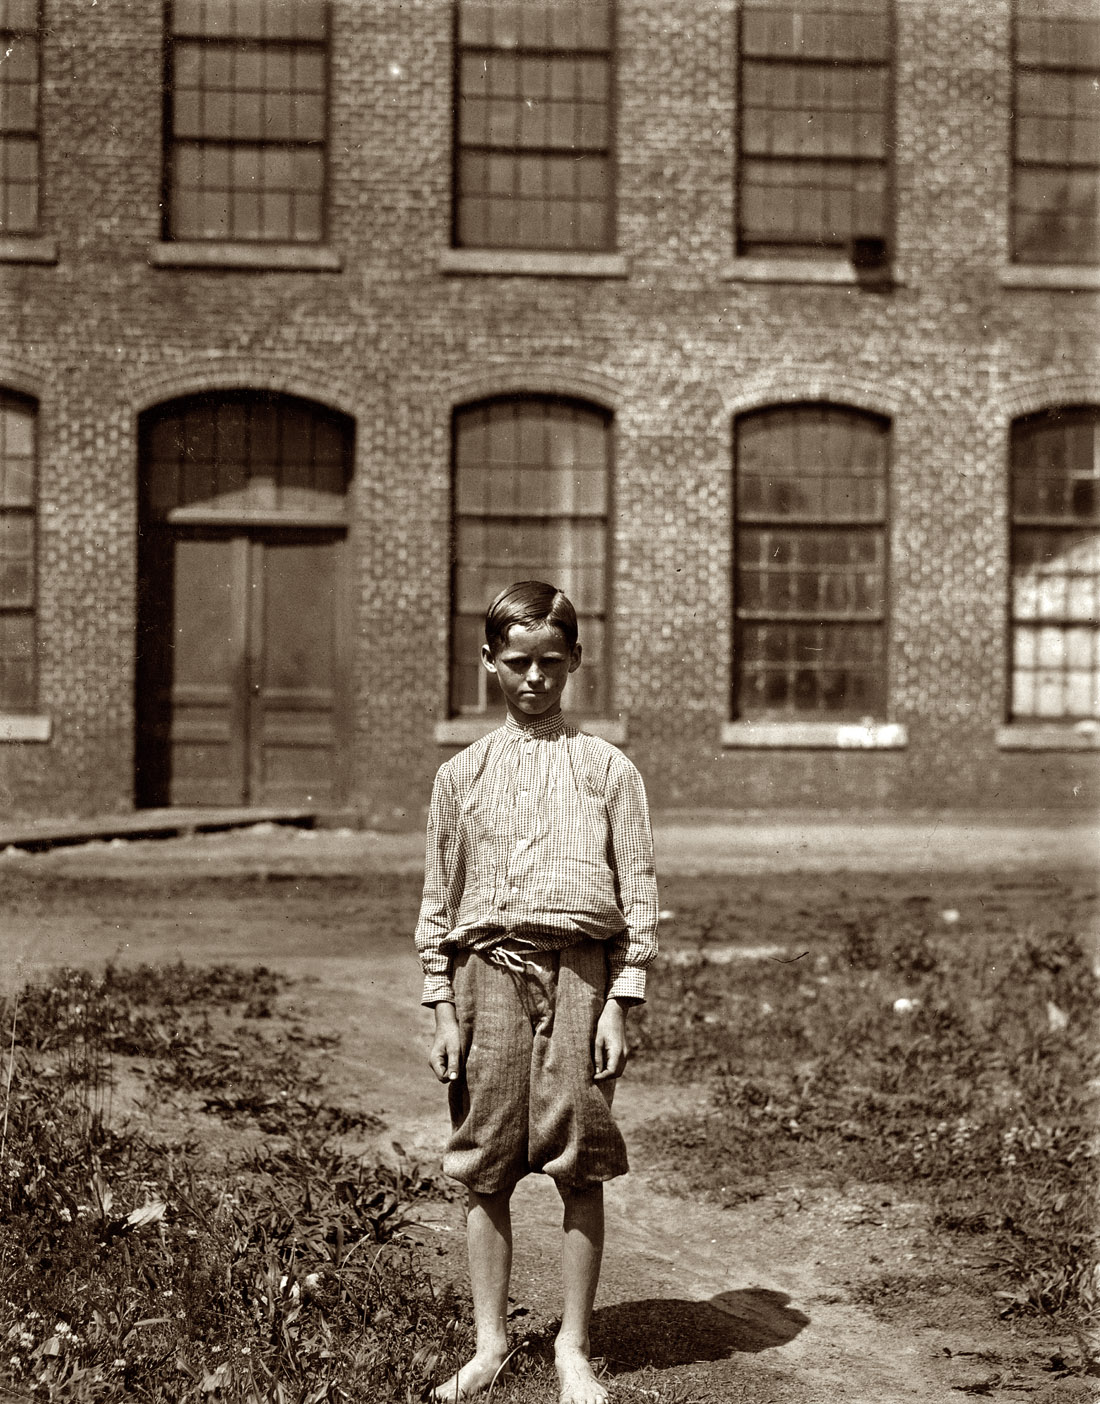 May 1912. Rock Hill, South Carolina. Arthur Newell, doffer in Manchester Mills. Three weeks at it. 70 cents a day. Said 12 years old. His father in the mill gets $12 a week, mother $9, sister $4.80, he gets $4.20, total $30 a week. "I had ruther go to school but the mill wanted me." View full size. Photo by Lewis Wickes Hine.